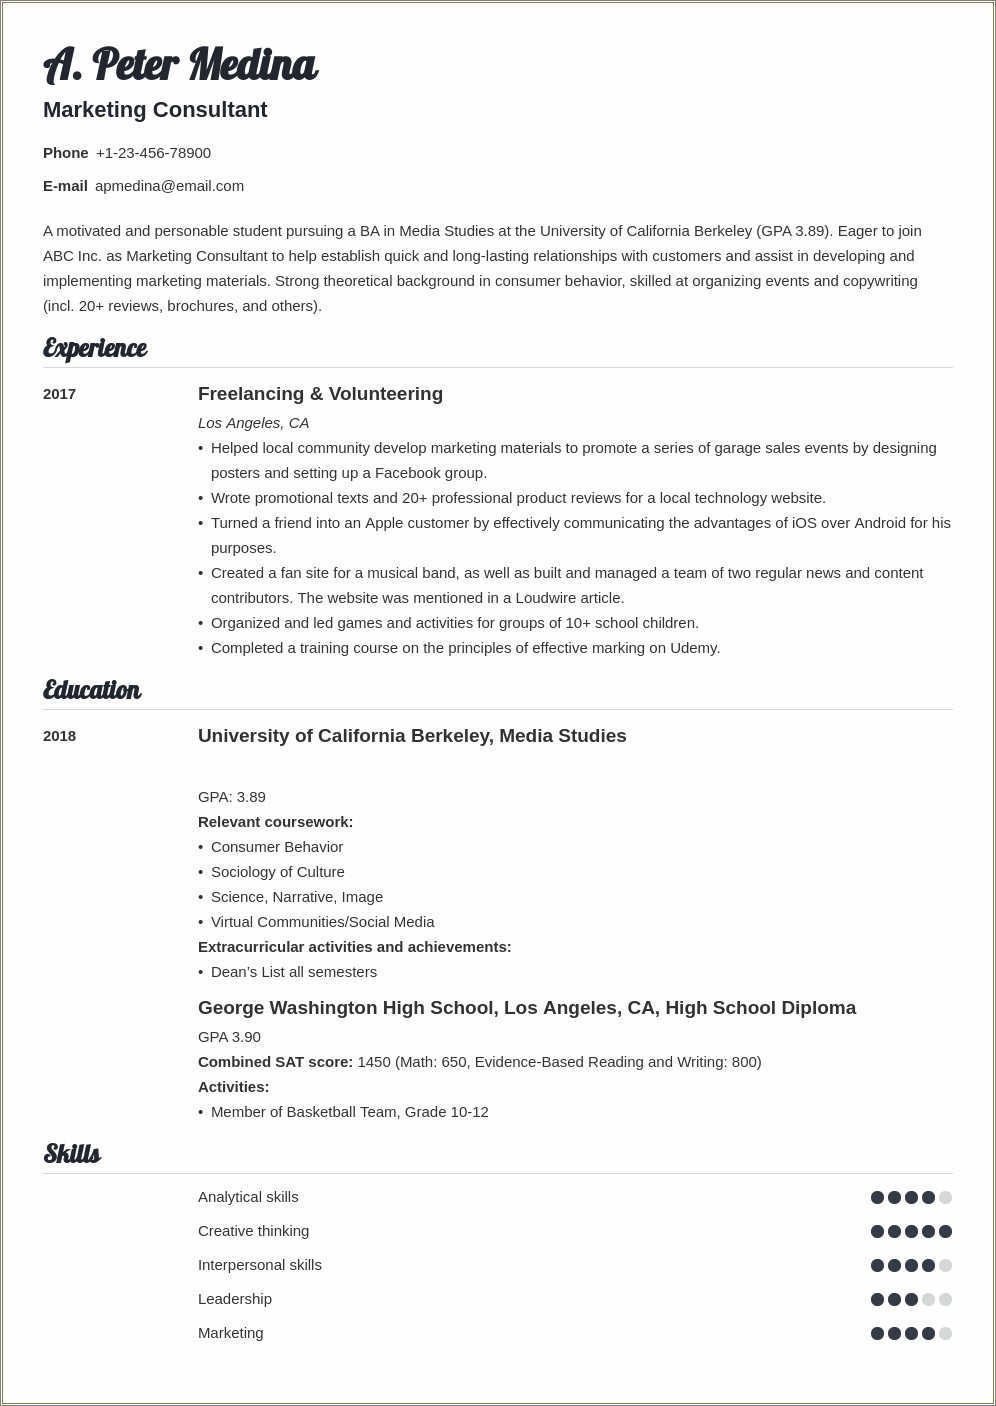 Resume Sample For Job With Objective Statement